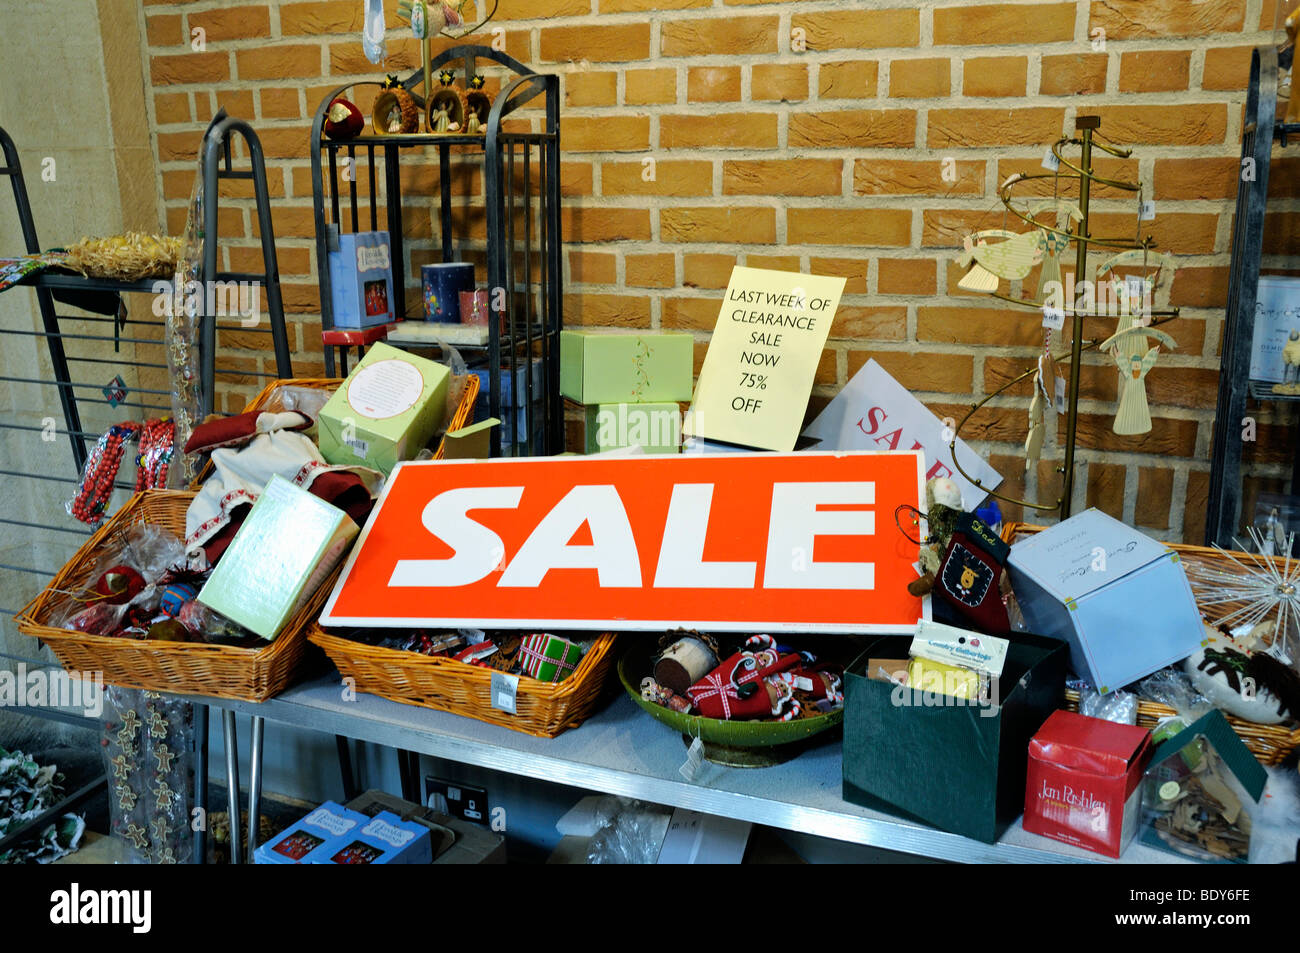 Sale sign in red and white on stall with clearance goods behind Stock Photo